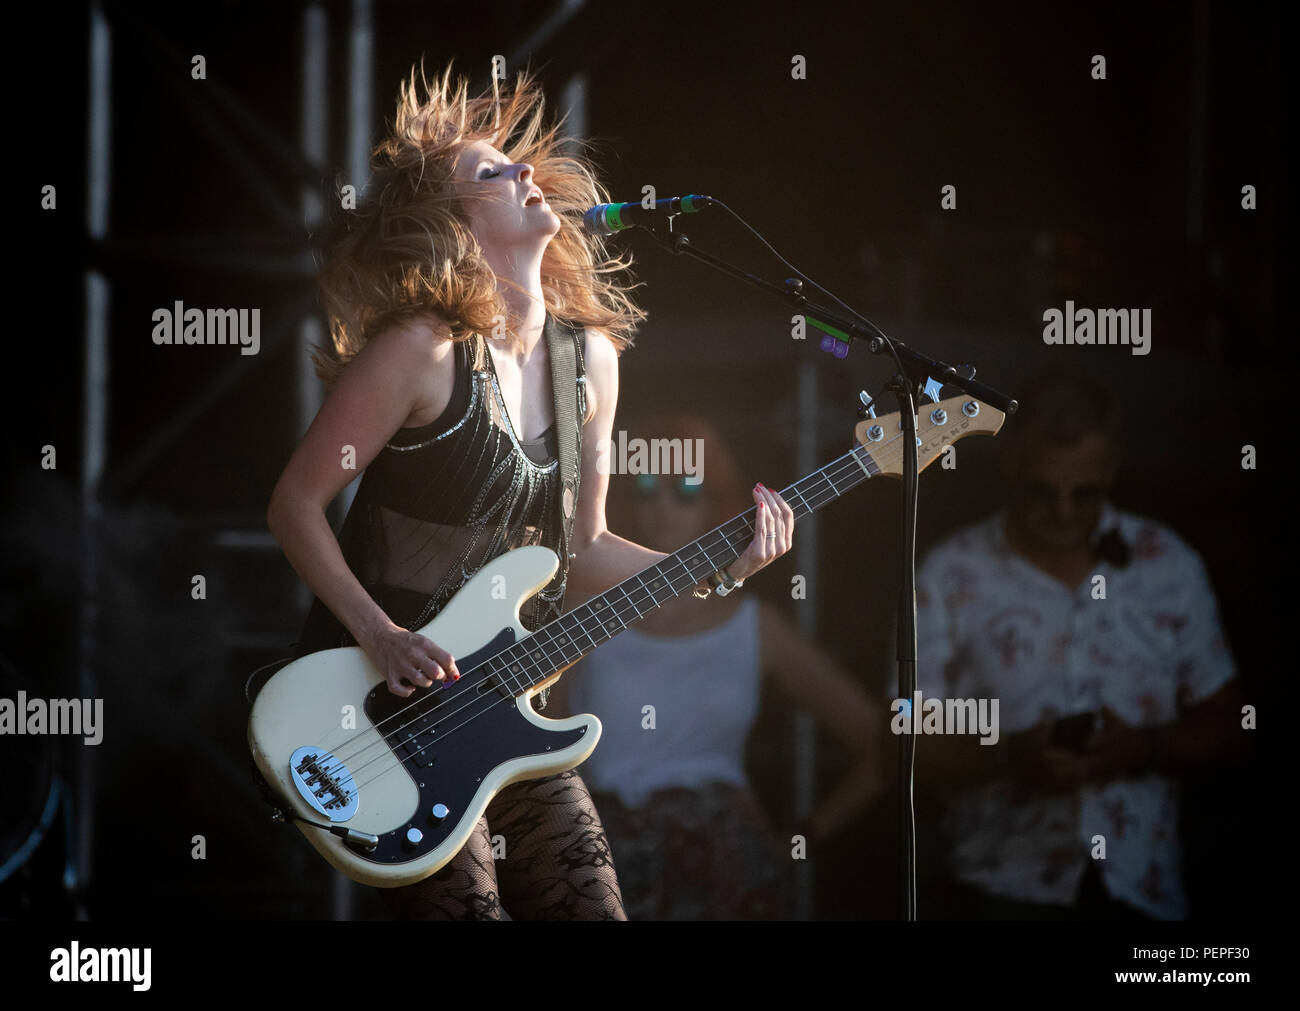 Stoermthal, Germany. 17th Aug, 2018. Charlotte Cooper, singer and bassist of the band The Subways will perform at the Highfield Festival 2018. About 35,000 fans of rock, indie and hip hop are expected to attend the 21st Highfield Festival, according to the organizers. Credit: Alexander Prautzsch/dpa-Zentralbild/dpa/Alamy Live News Stock Photo